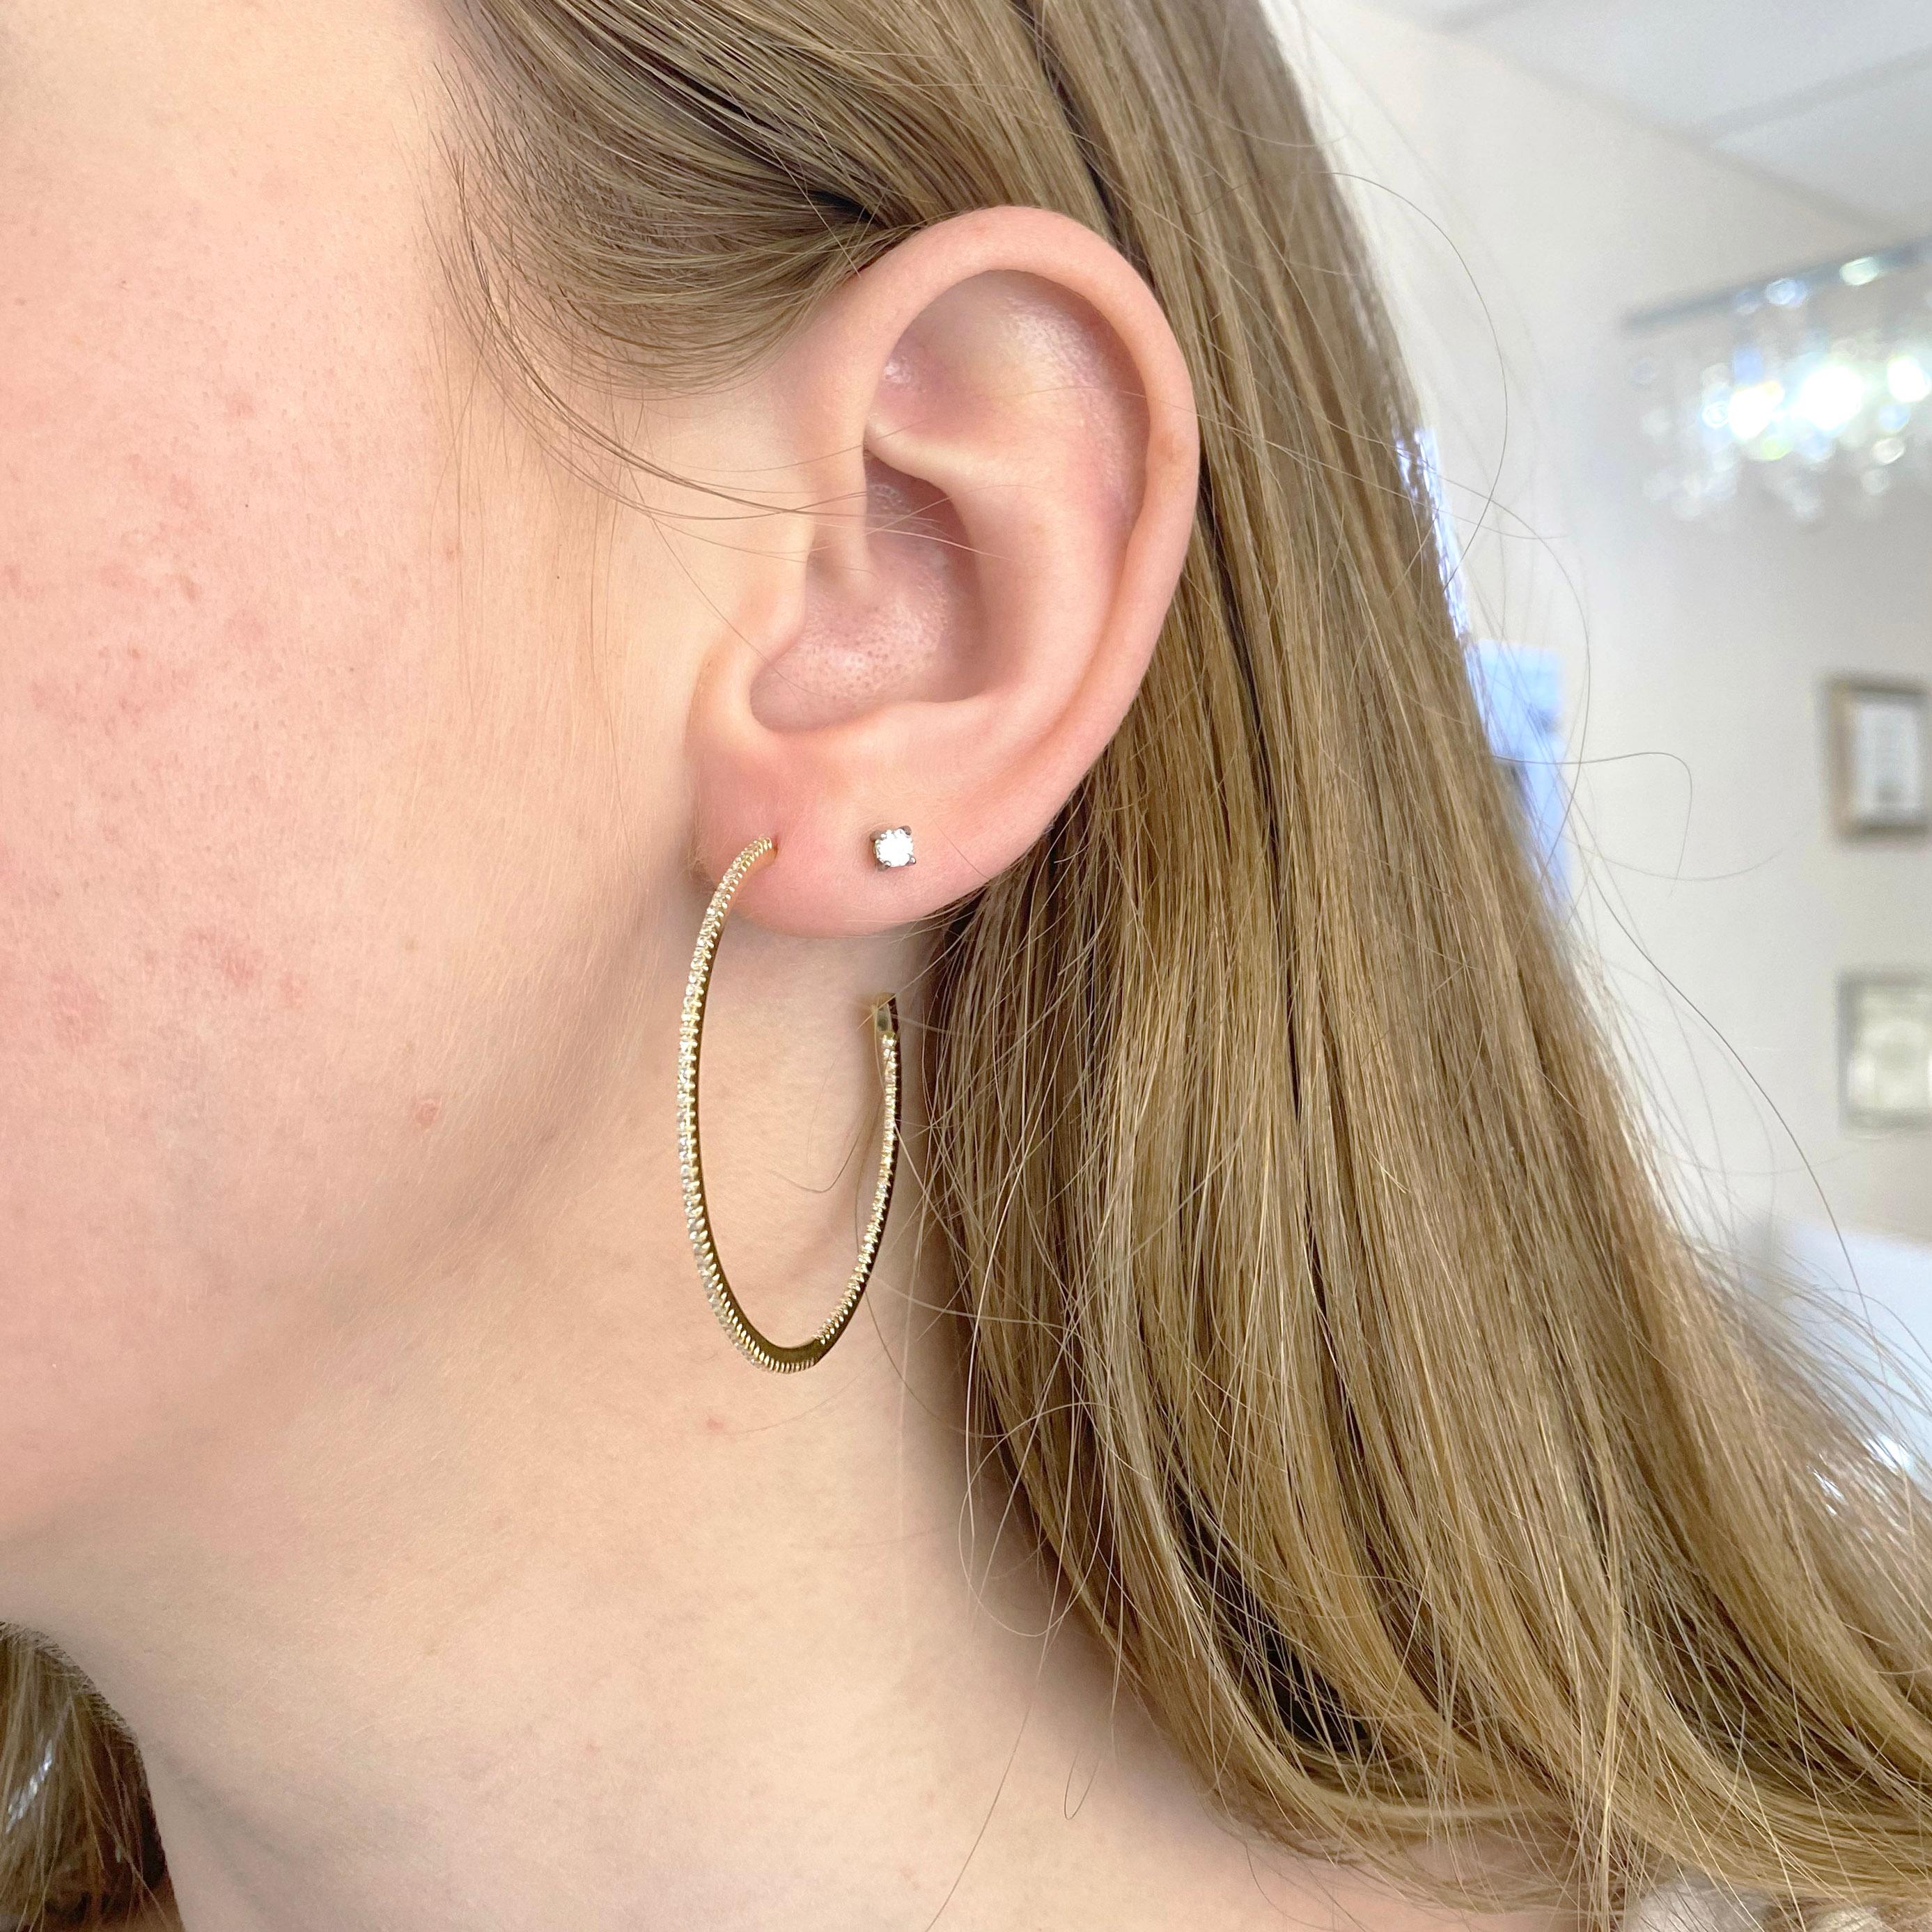 These 40 millimeters diamond hoop earrings are perfect for a bold look!  There are 92 diamonds on each earring and make a continuous round circle and the earrings are made in solid 14 karat yellow gold.  These earrings look great it’s long hair